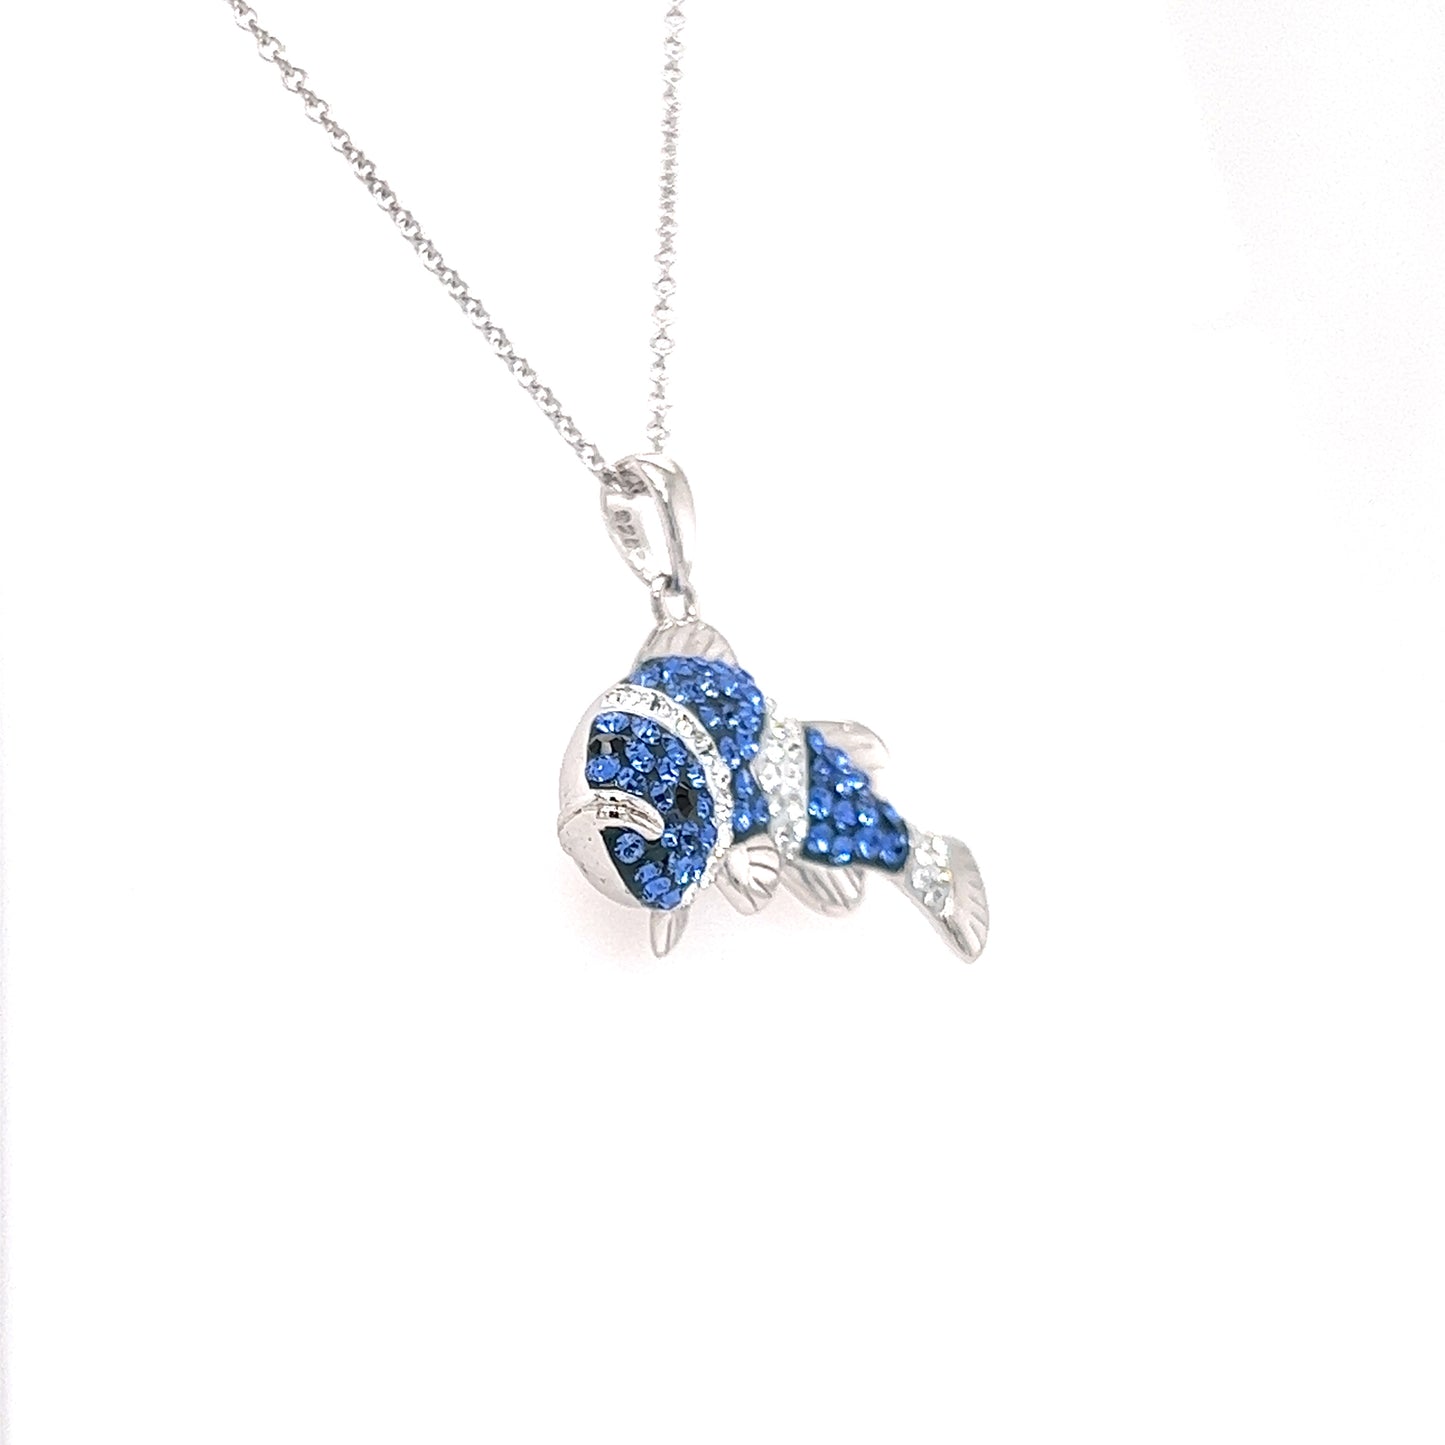 Clownfish Necklace with Blue and White Crystals in Sterling Silver Left Side View